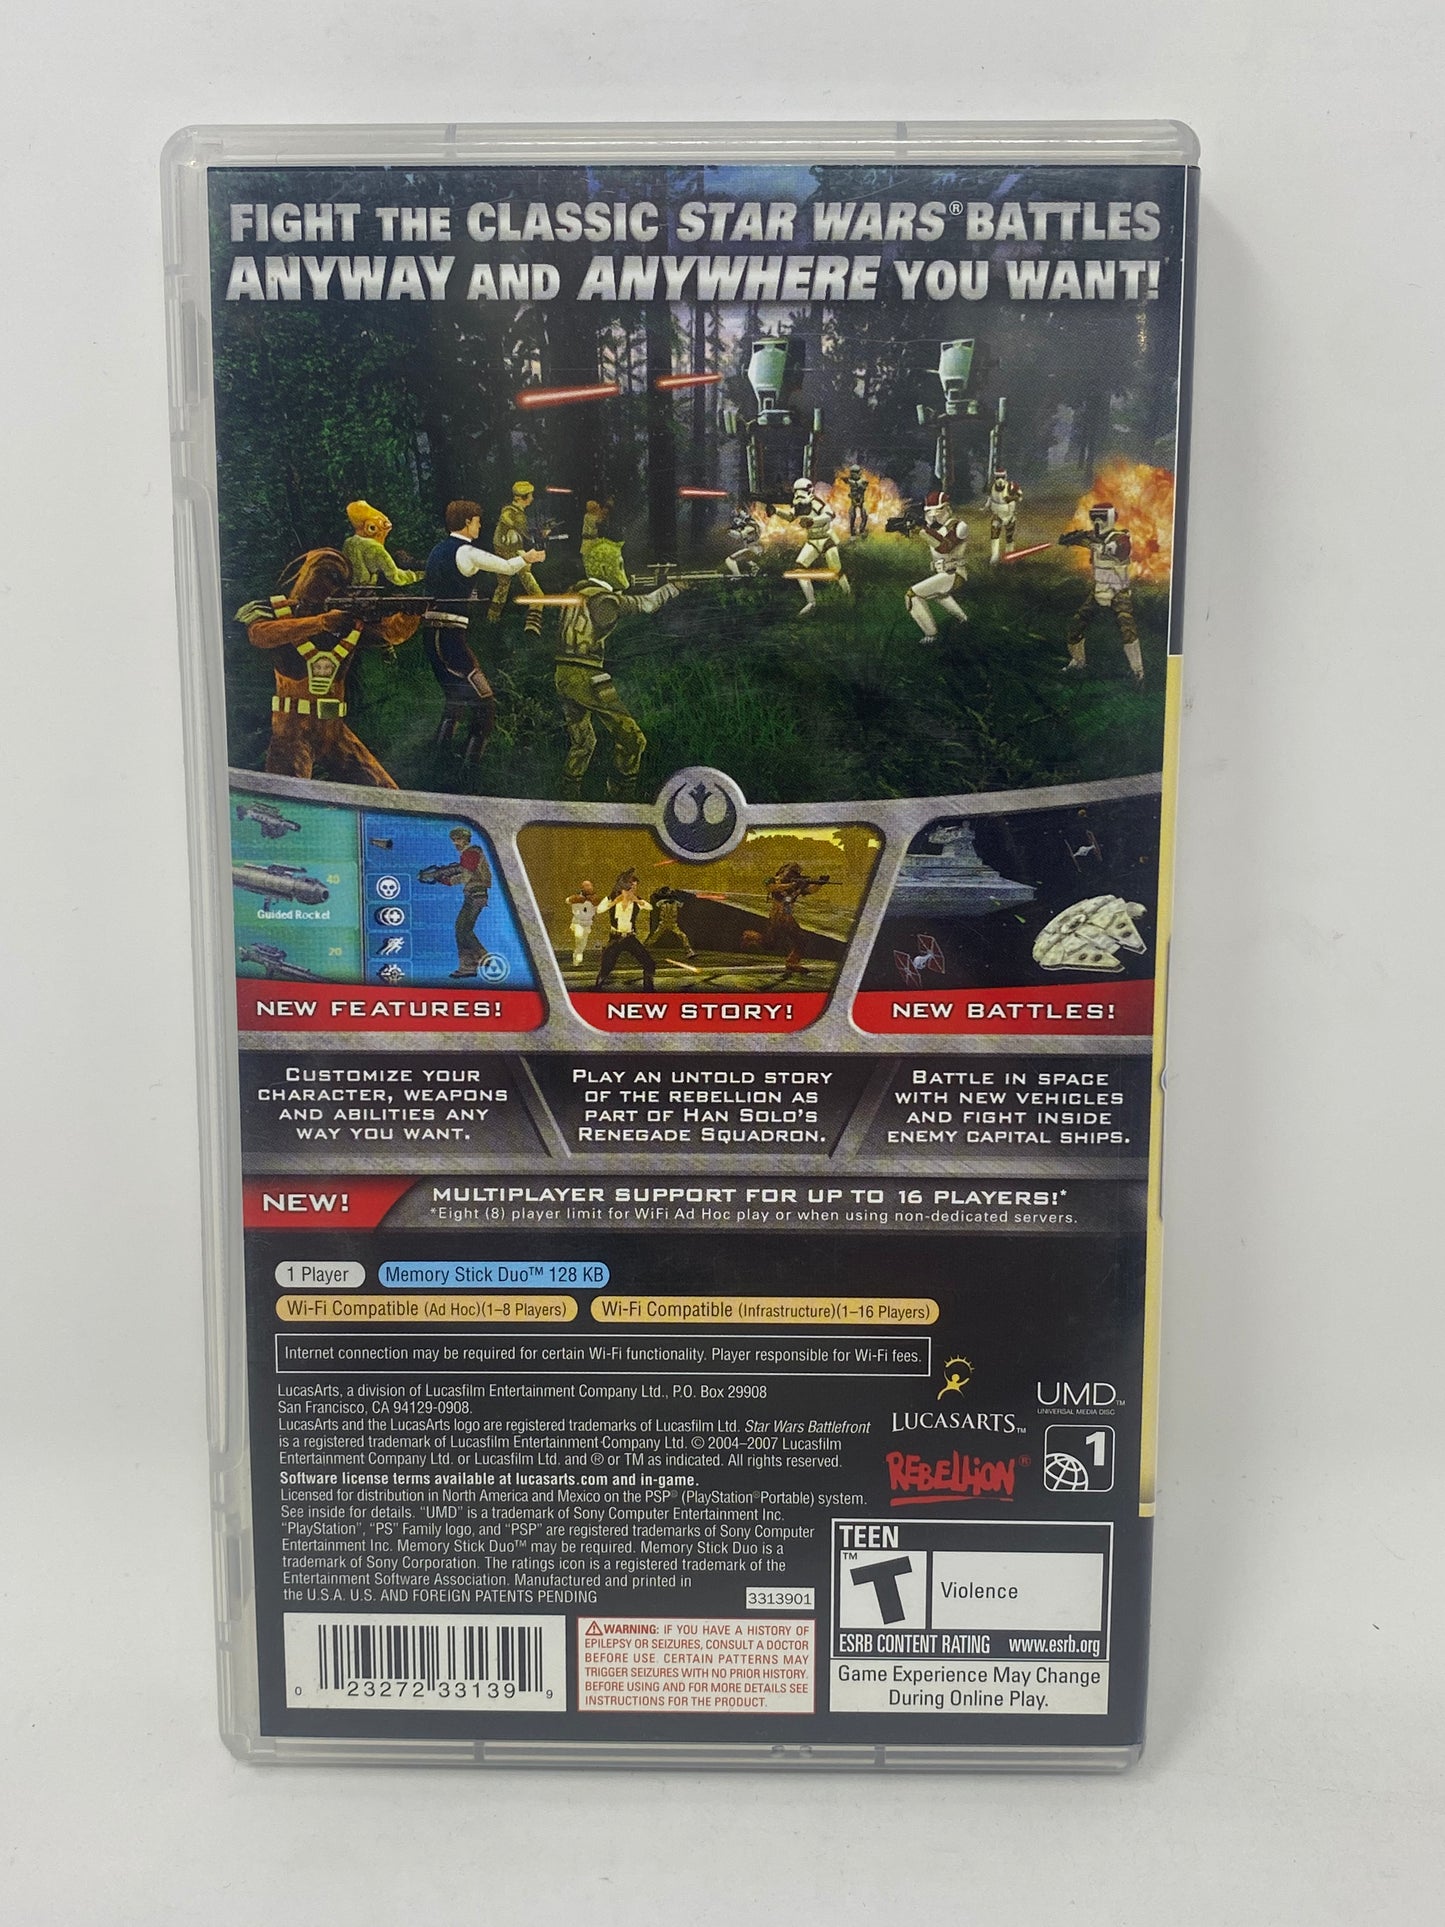 Sony PSP - Star Wars Battlefront Renegade Squadron